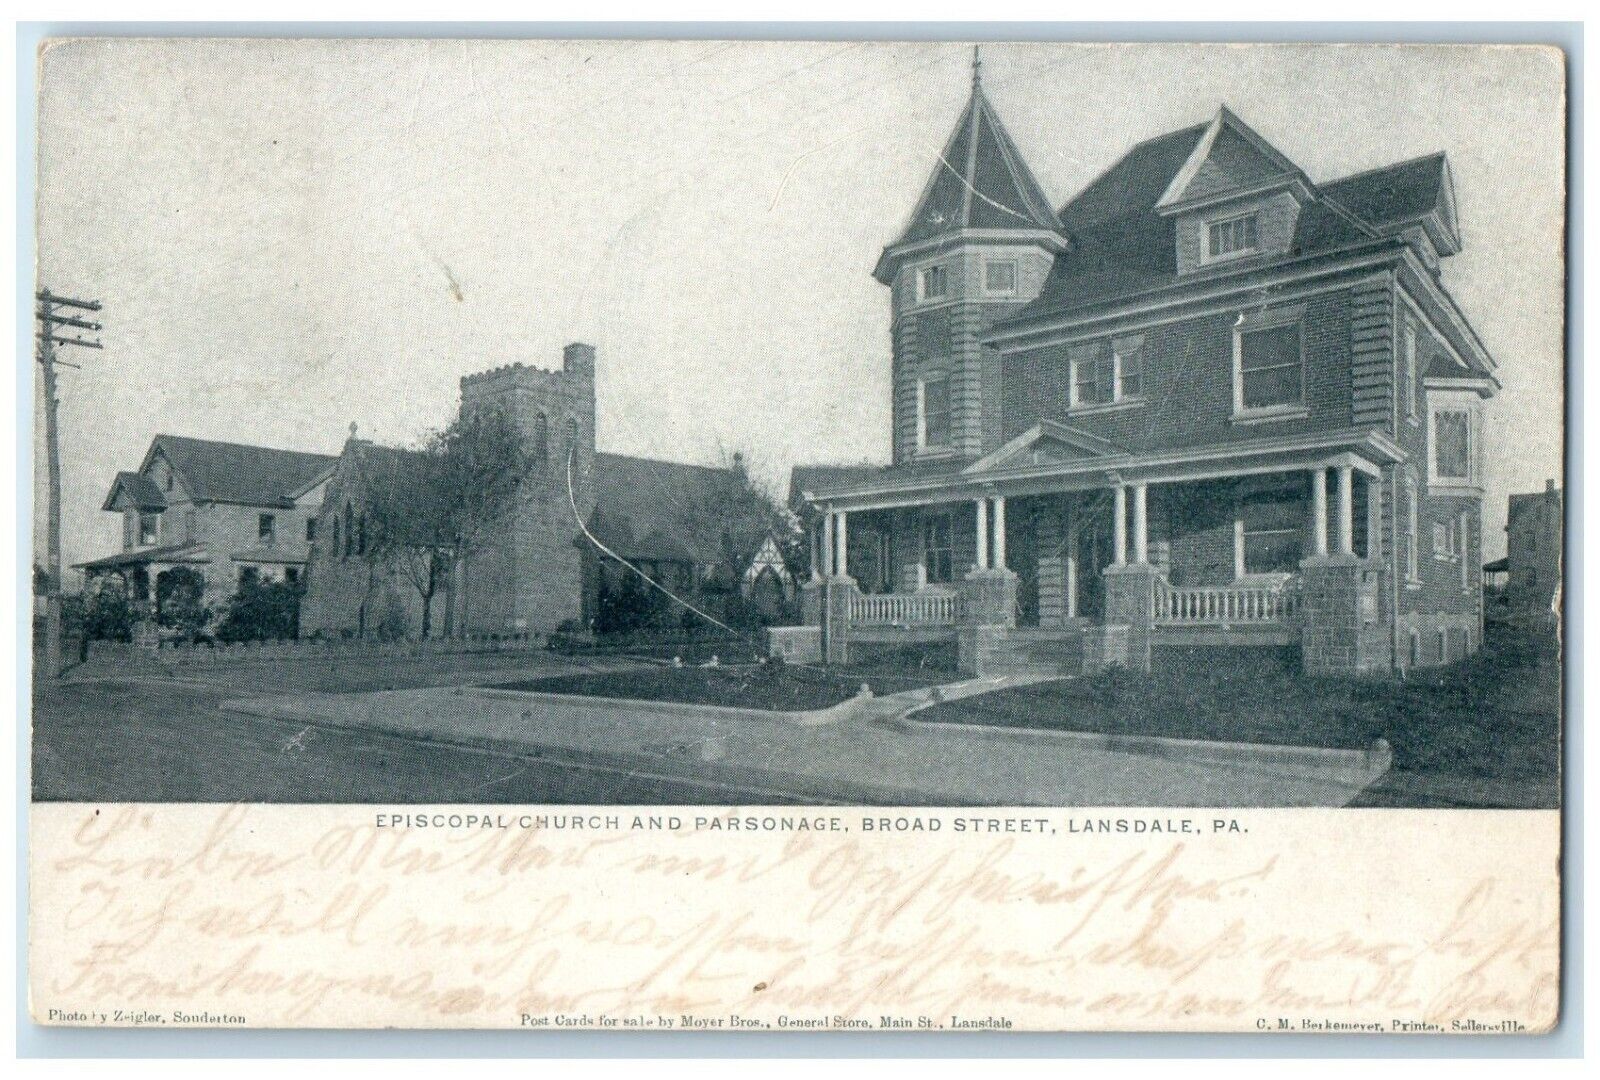 1908 Episcopal Church And Parsonage Broad Street Lansdale Pennsylvania Postcard